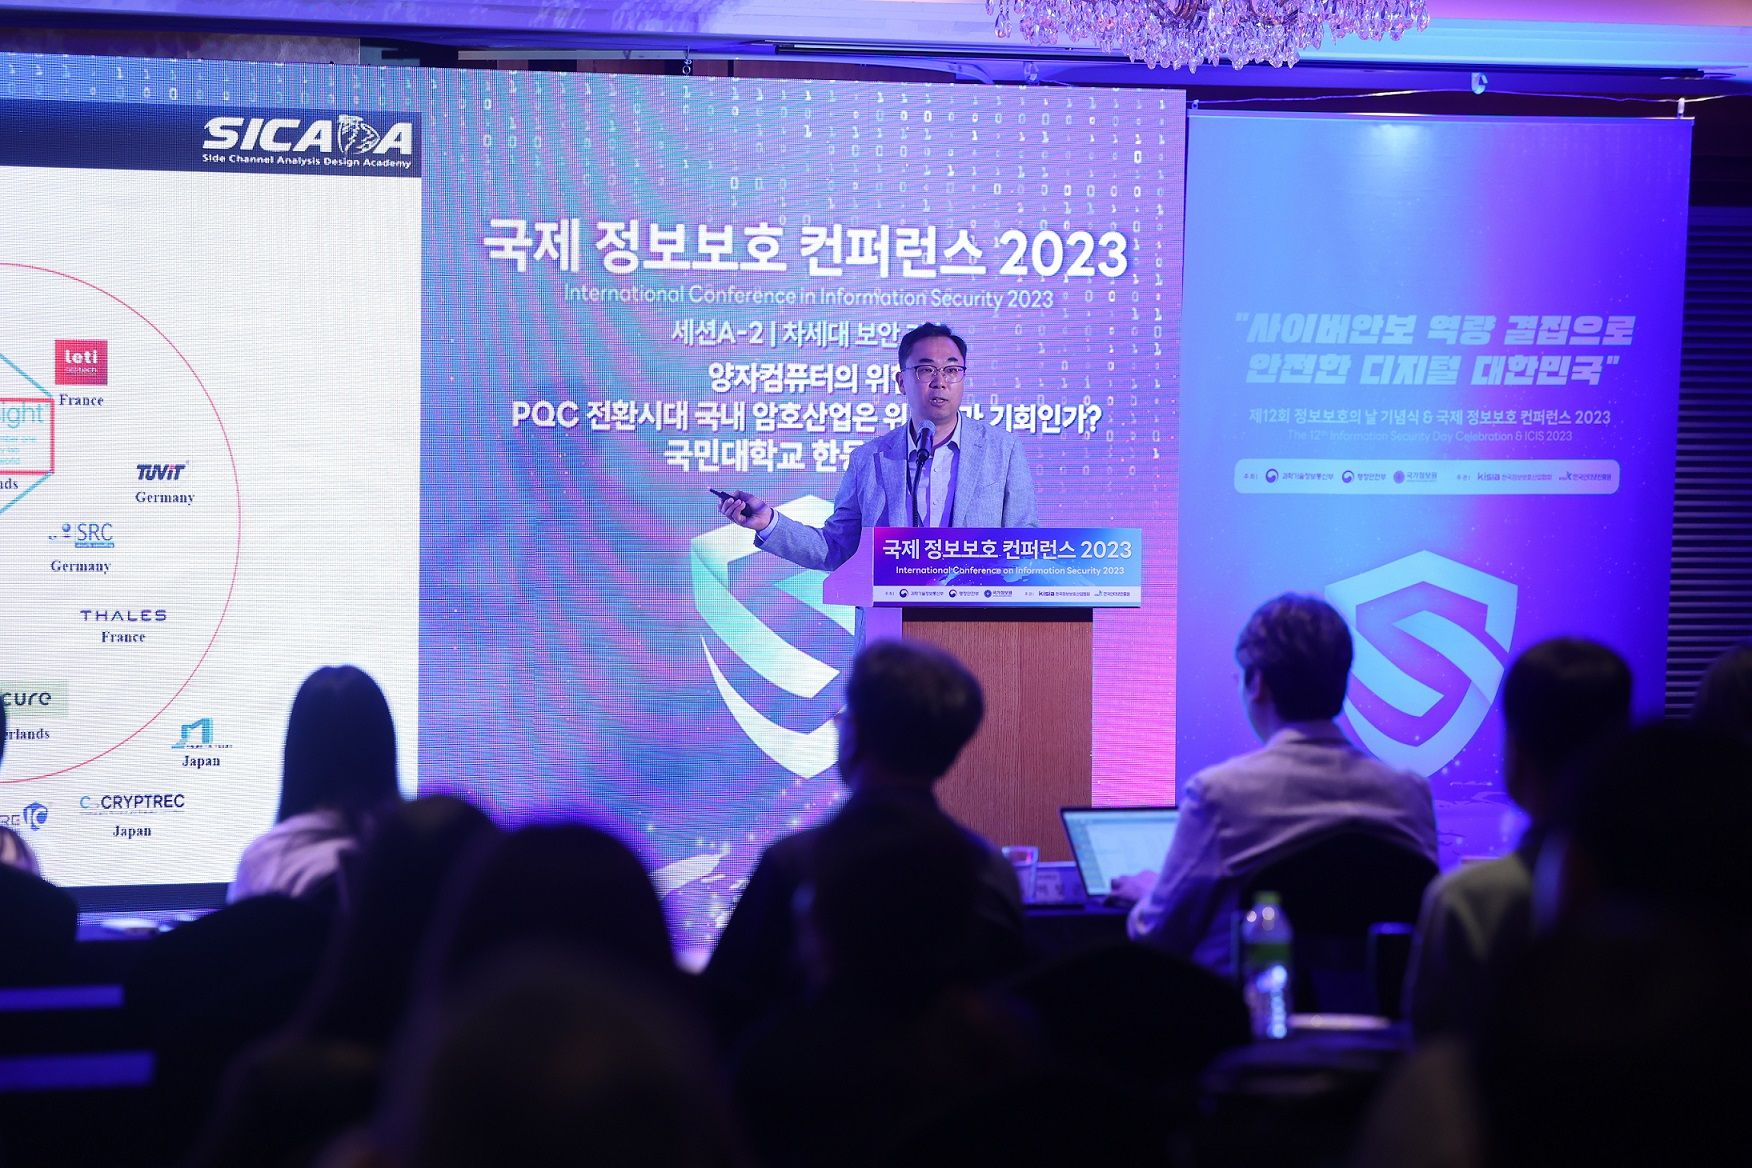 1 - Tackling phishing attacks becomes top priority for South Korea, expert asserts